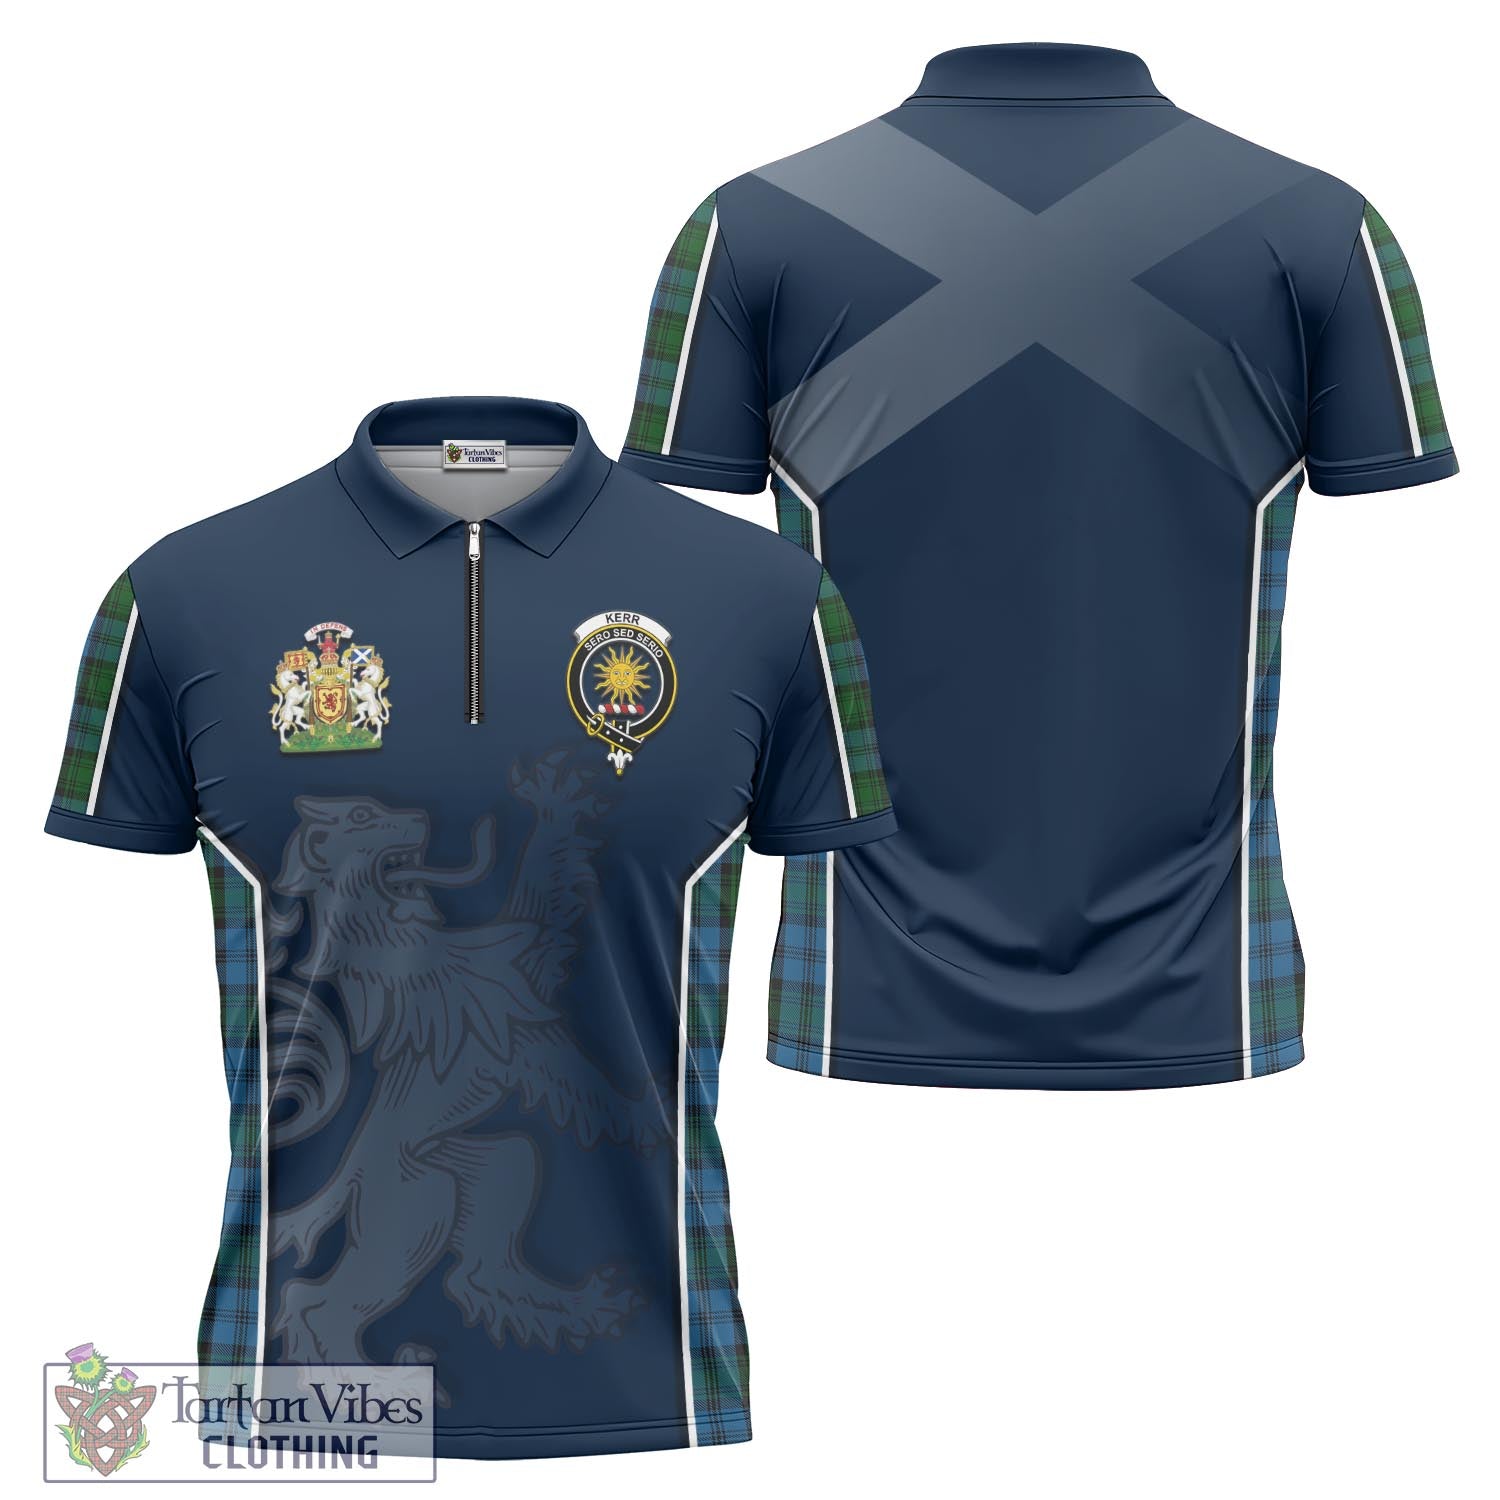 Tartan Vibes Clothing Kerr Hunting Tartan Zipper Polo Shirt with Family Crest and Lion Rampant Vibes Sport Style